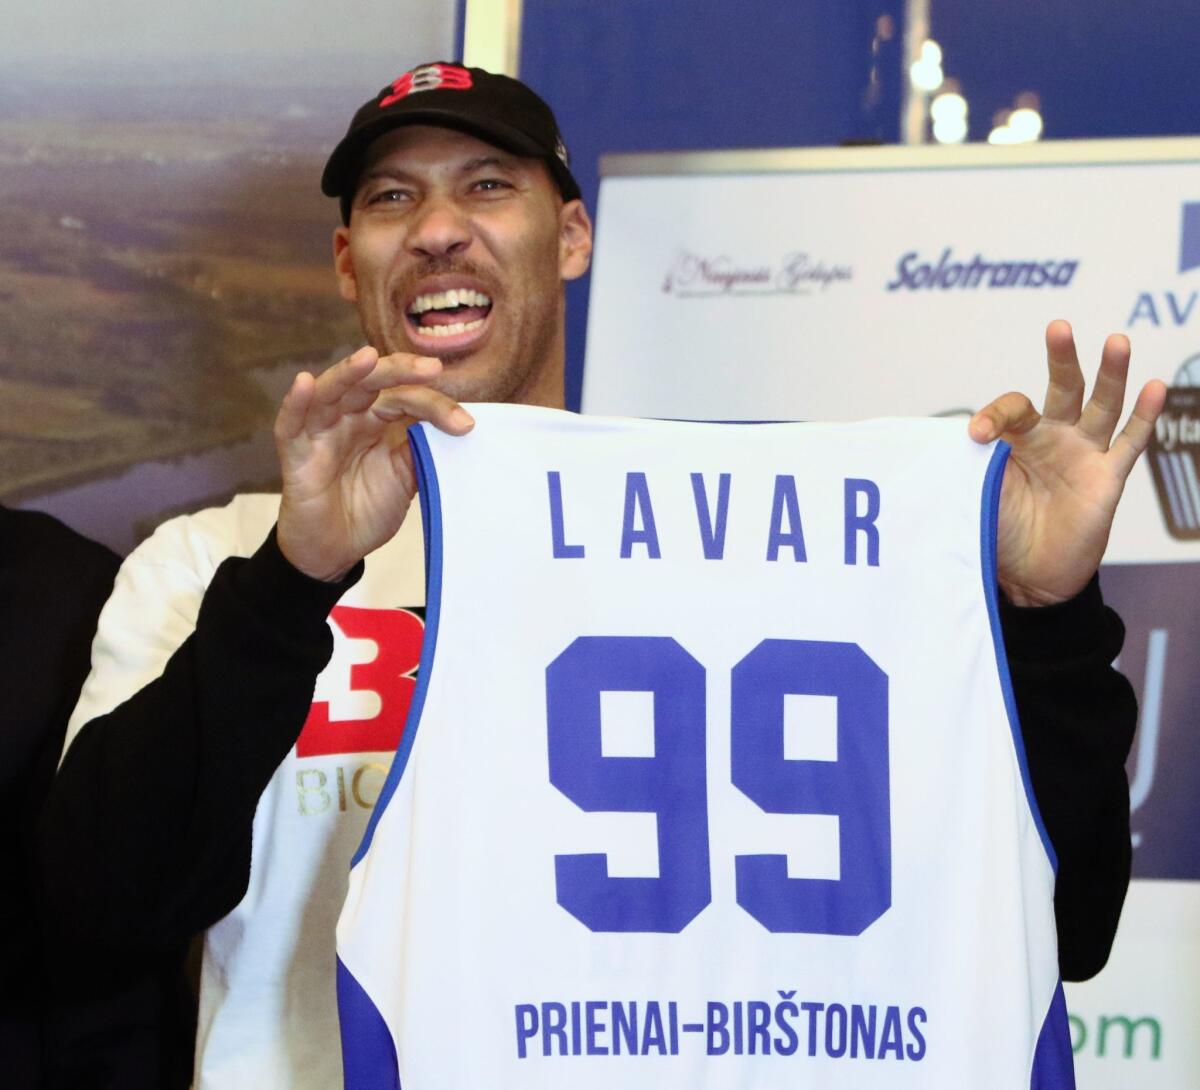 LaVar Ball holds up a team jersey during a news conference in Prienai, Lithuania, on Jan. 5.